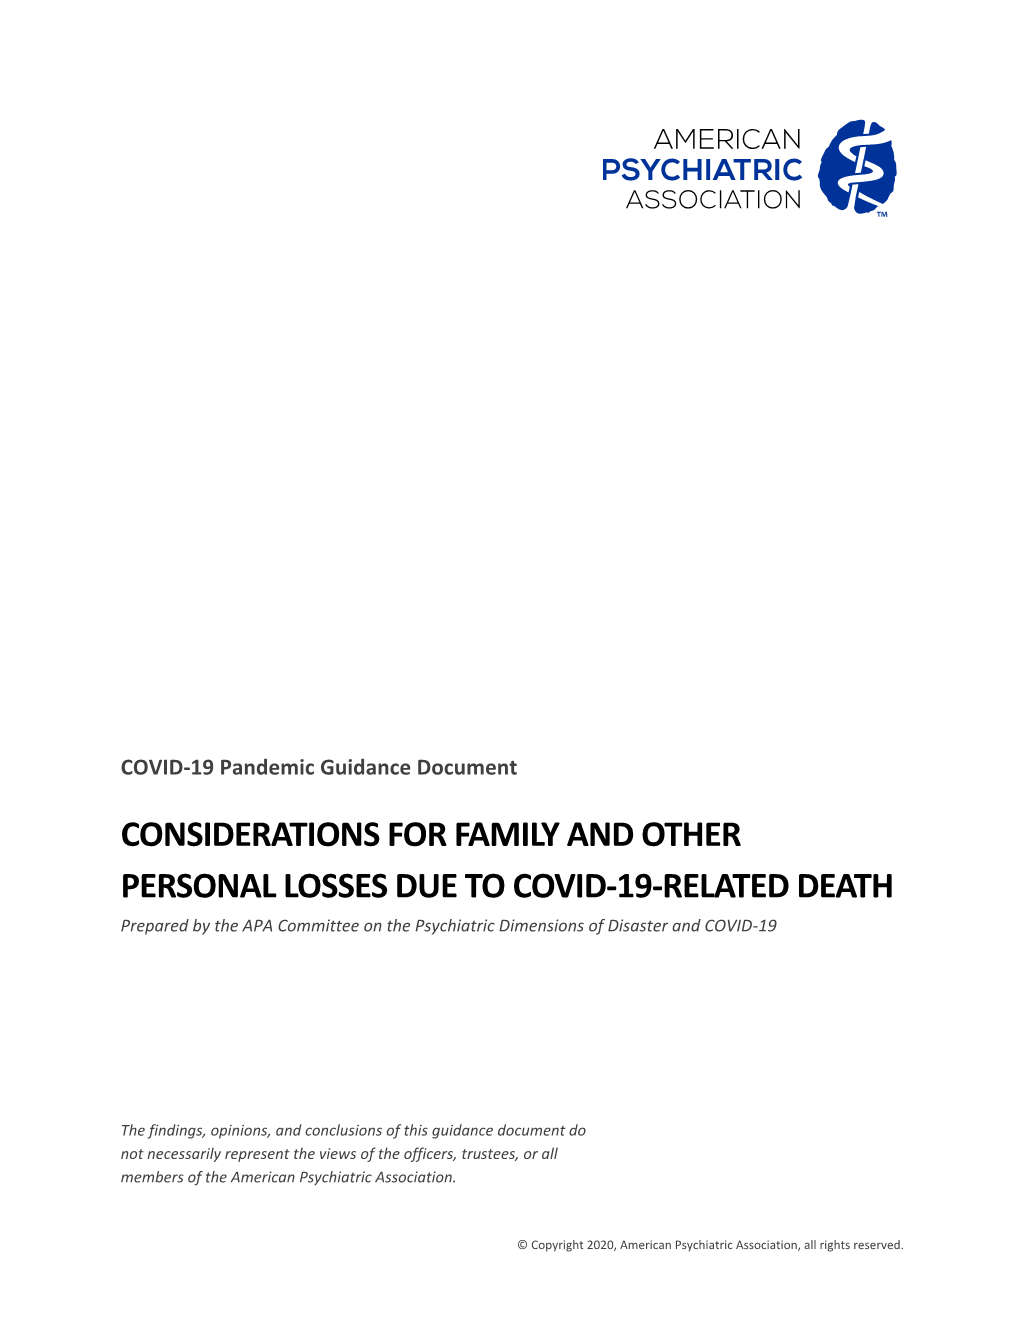 Considerations for Family and Other Personal Losses Due to COVID-19